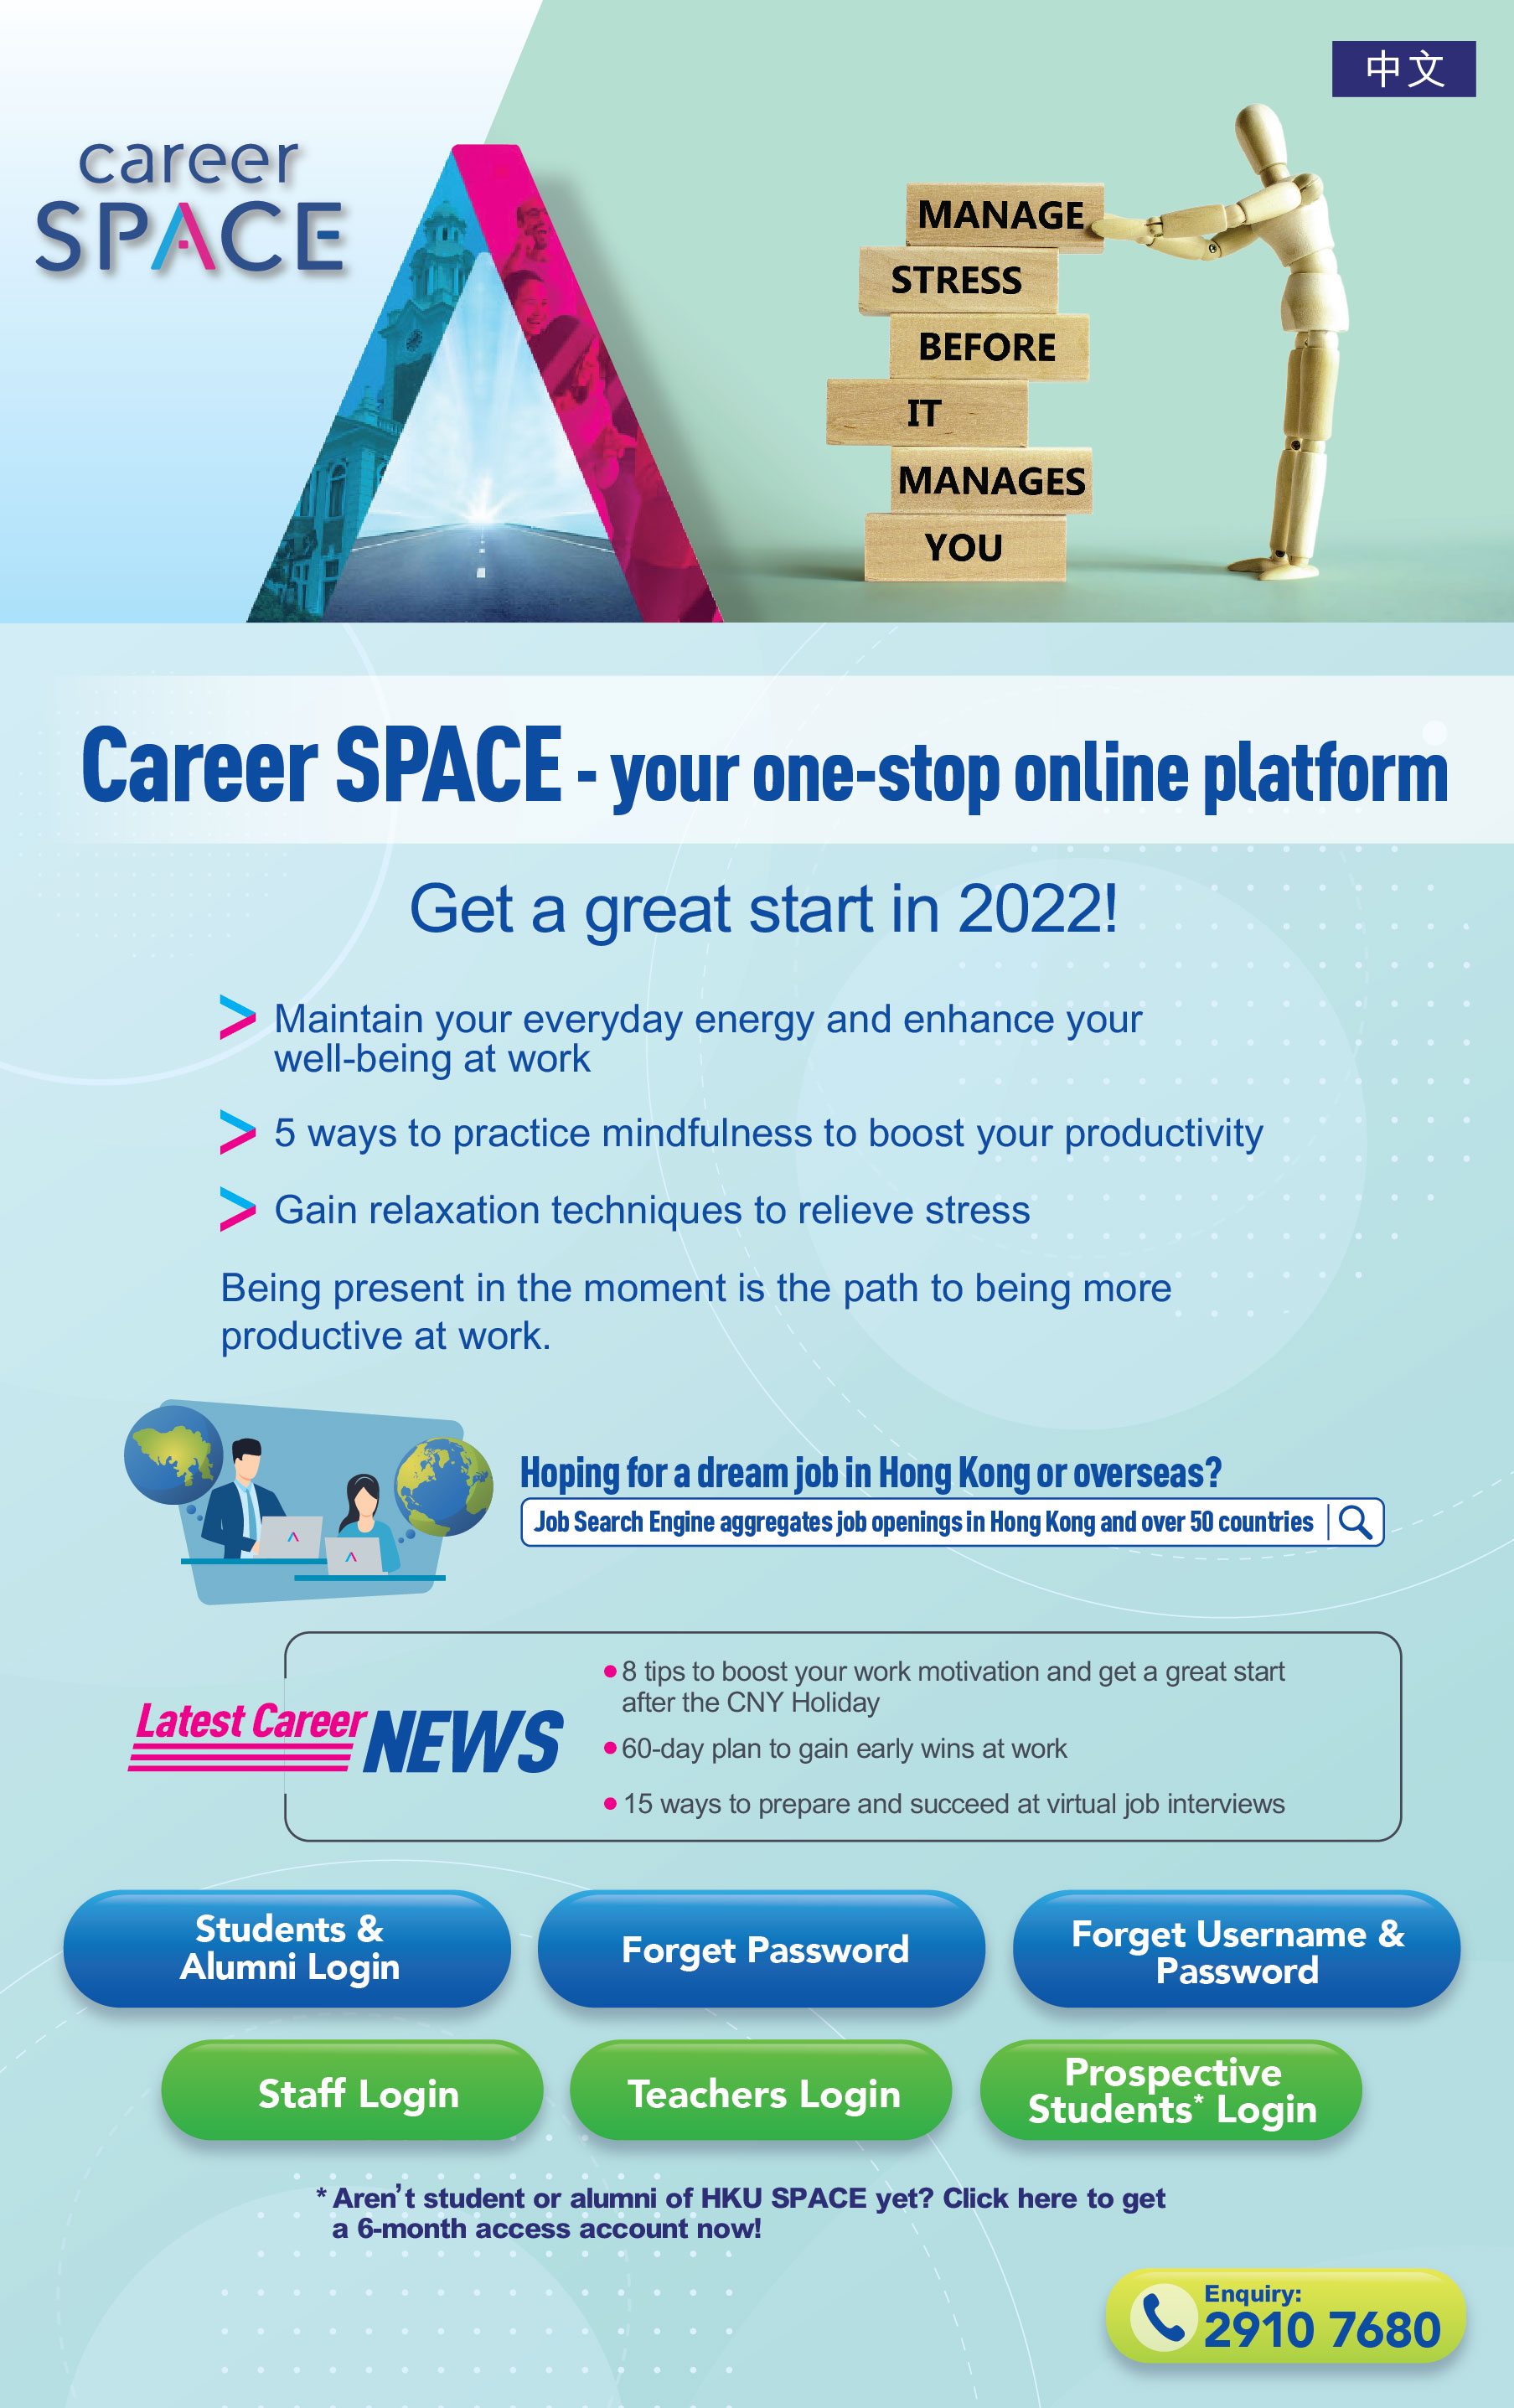 Career SPACE - your one-stop online platform Get a great start in 2022!